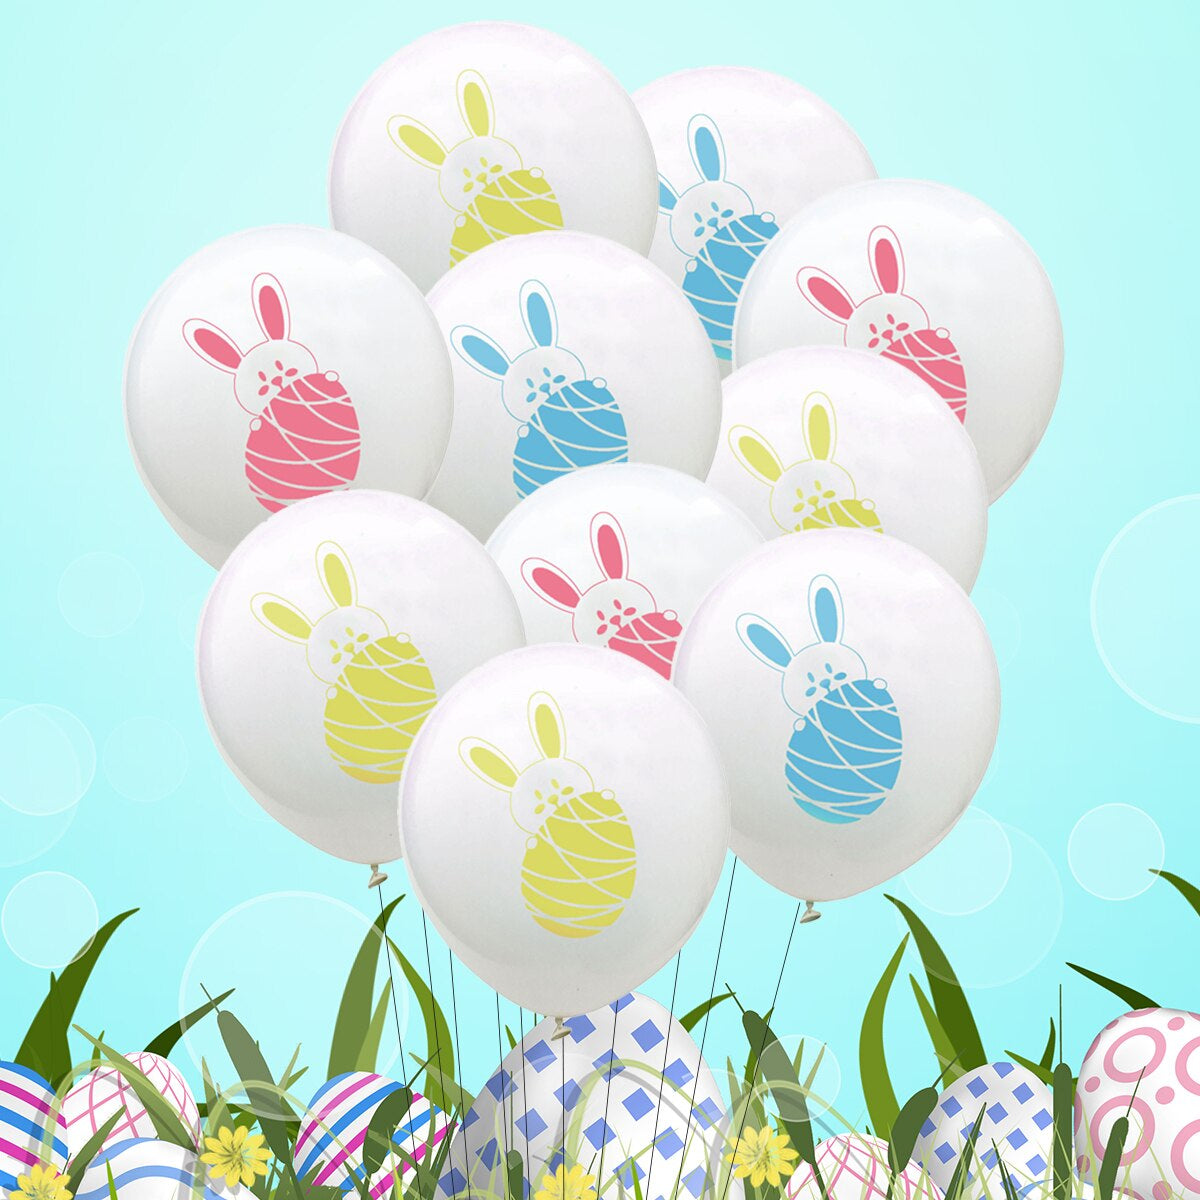 Rabbit Foil Balloons Easter Egg Latex Balloon for Easter Decorations Party Inflatable Children'S Gifts